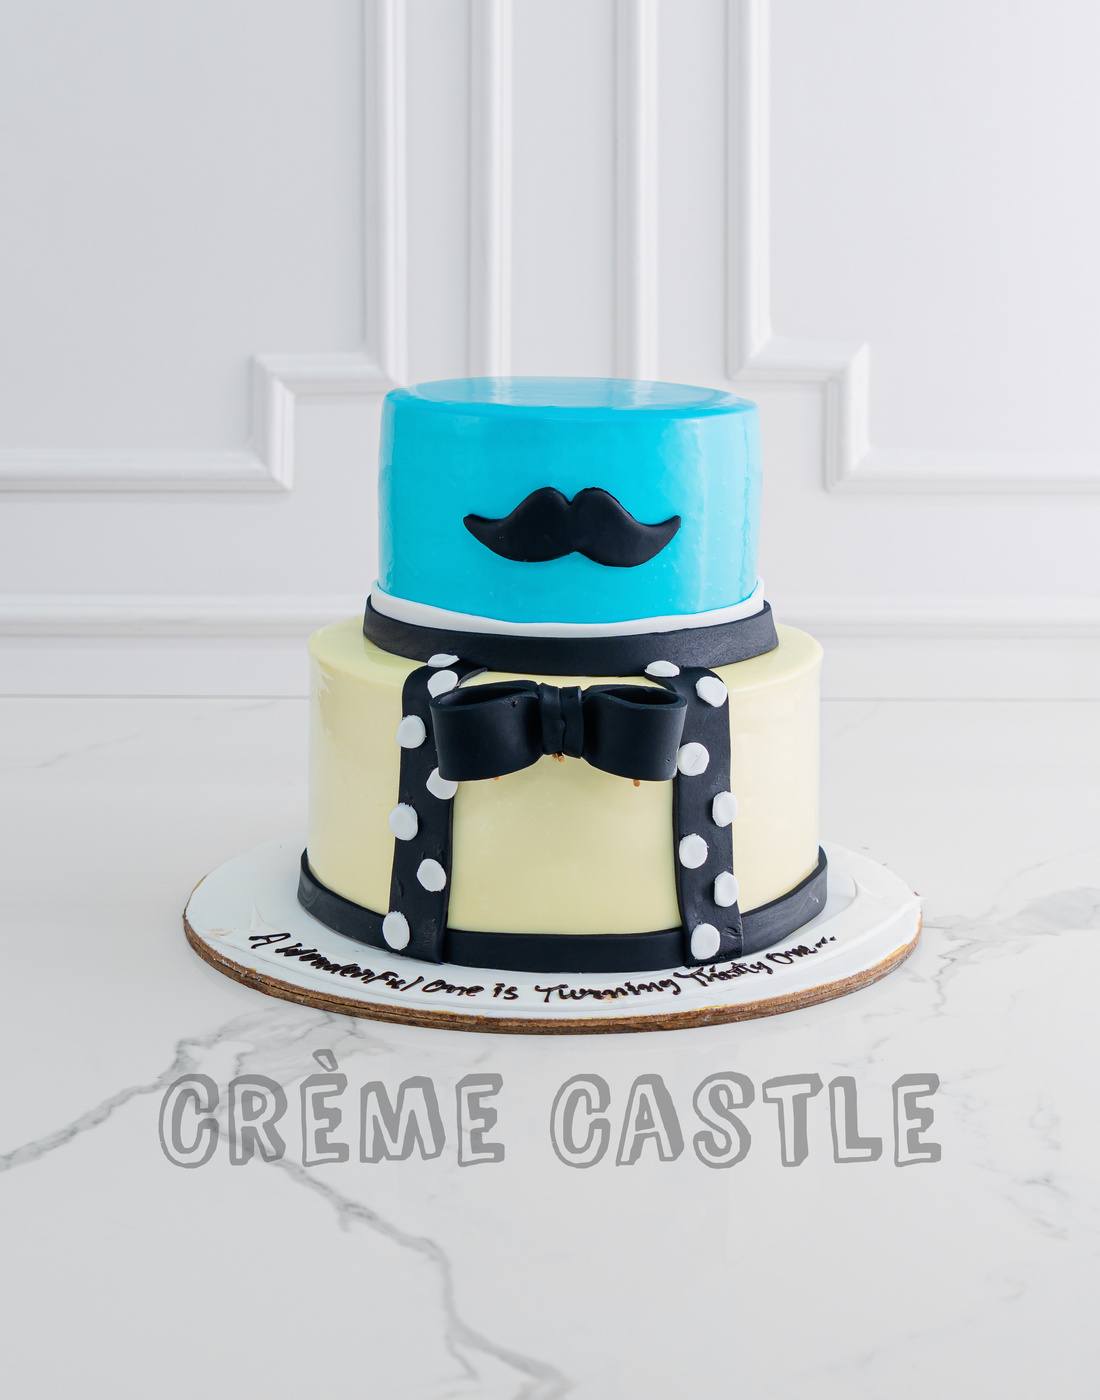 Mustache Theme Cake Delivery in Delhi NCR - ₹2,349.00 Cake Express